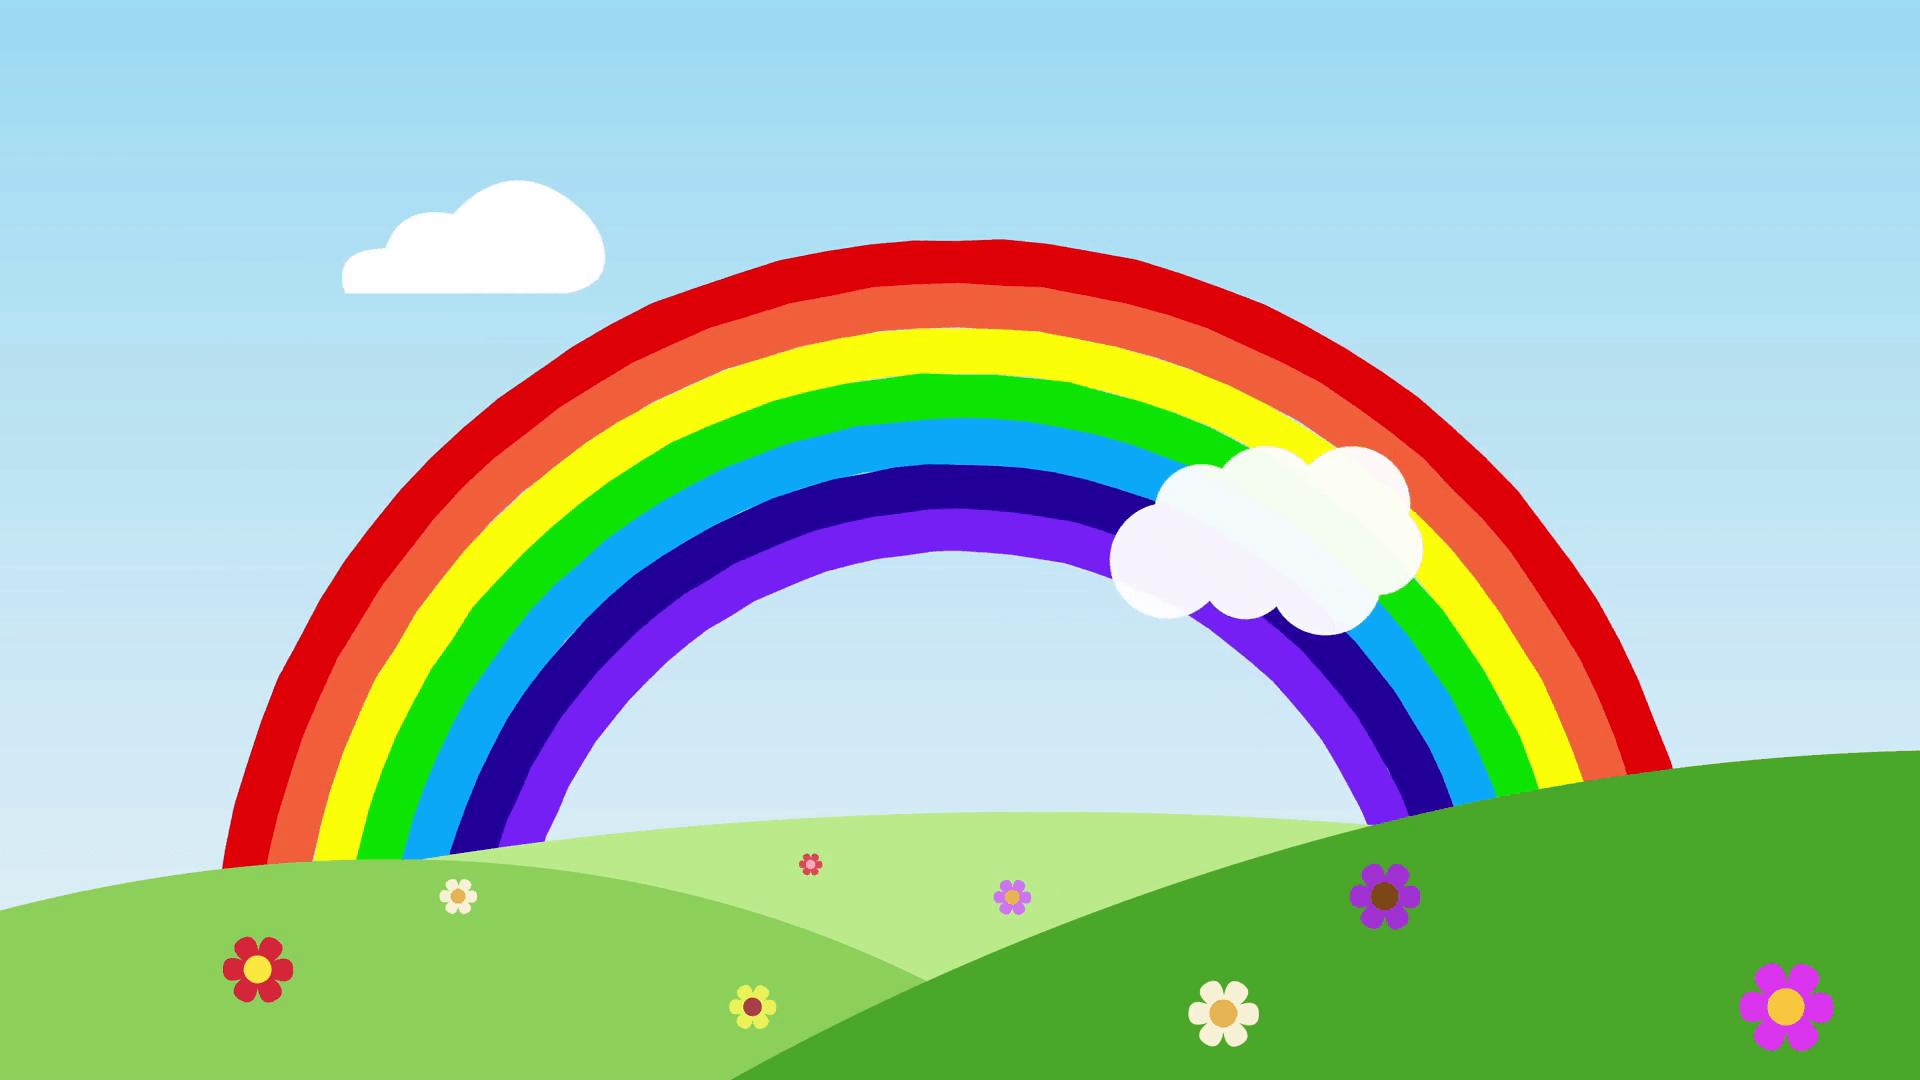 cute cartoon animation of colorful rainbow with some clouds over